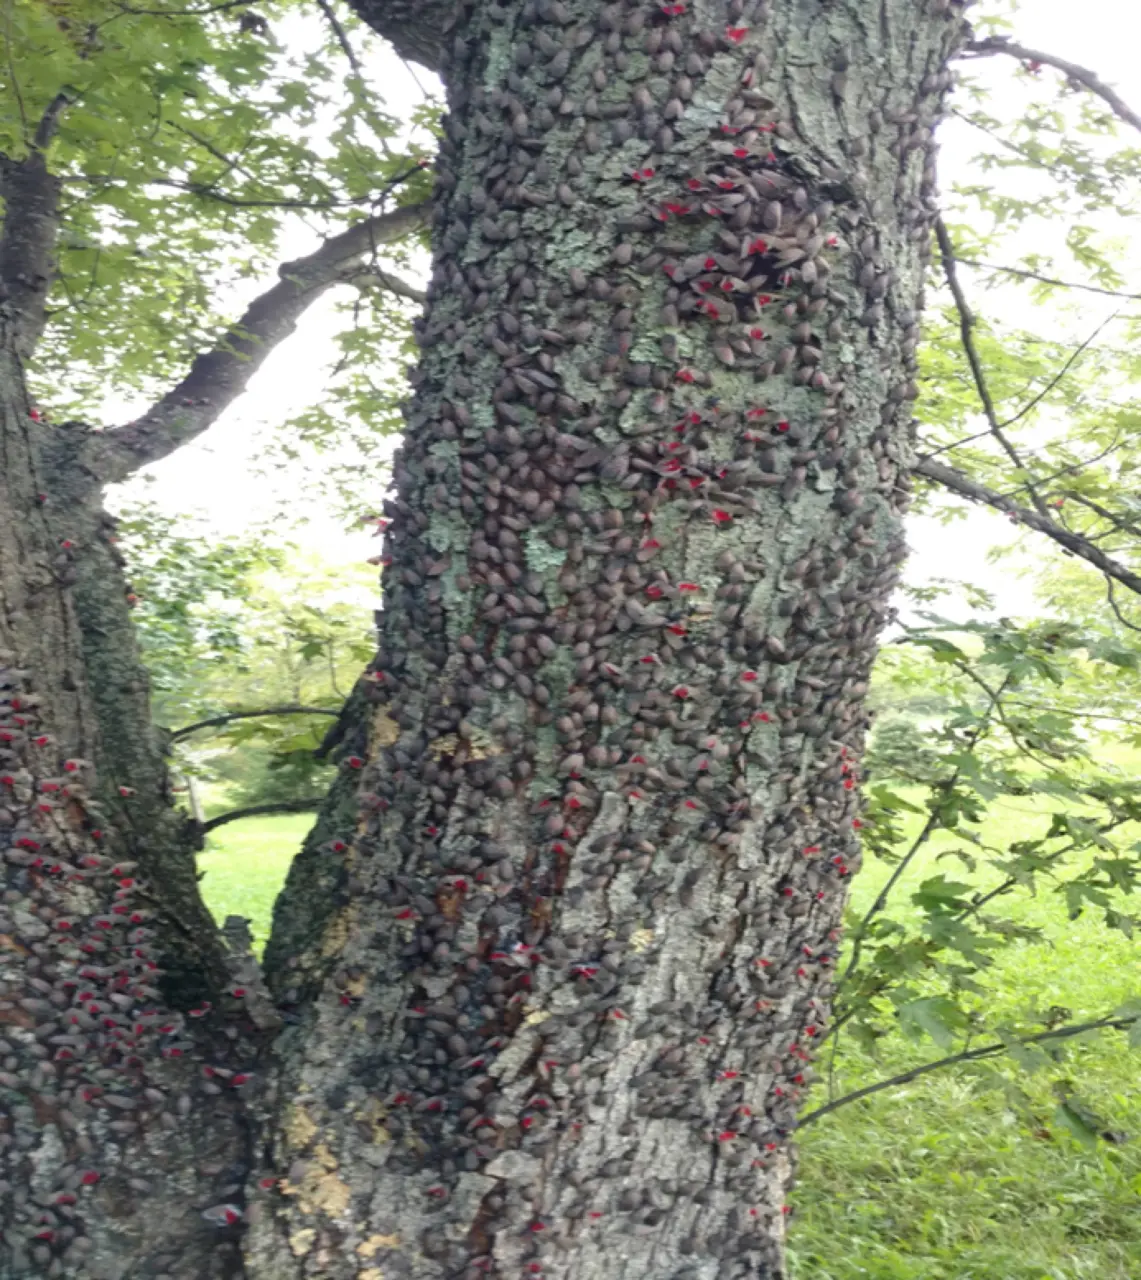 Adult spotted lanternflies cover this maple tree.